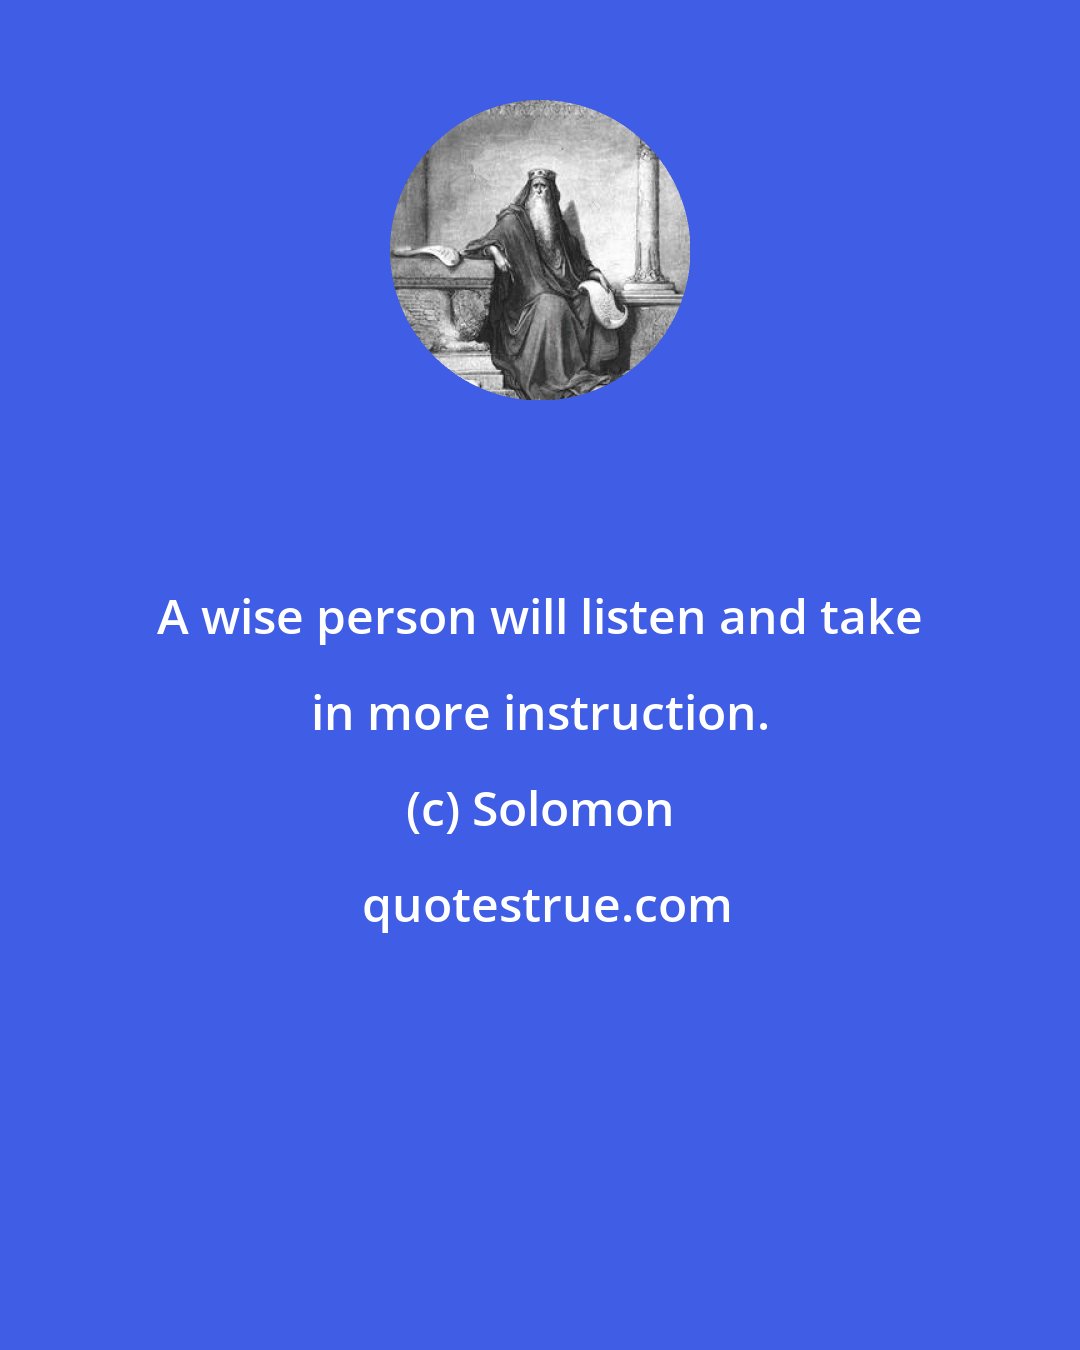 Solomon: A wise person will listen and take in more instruction.